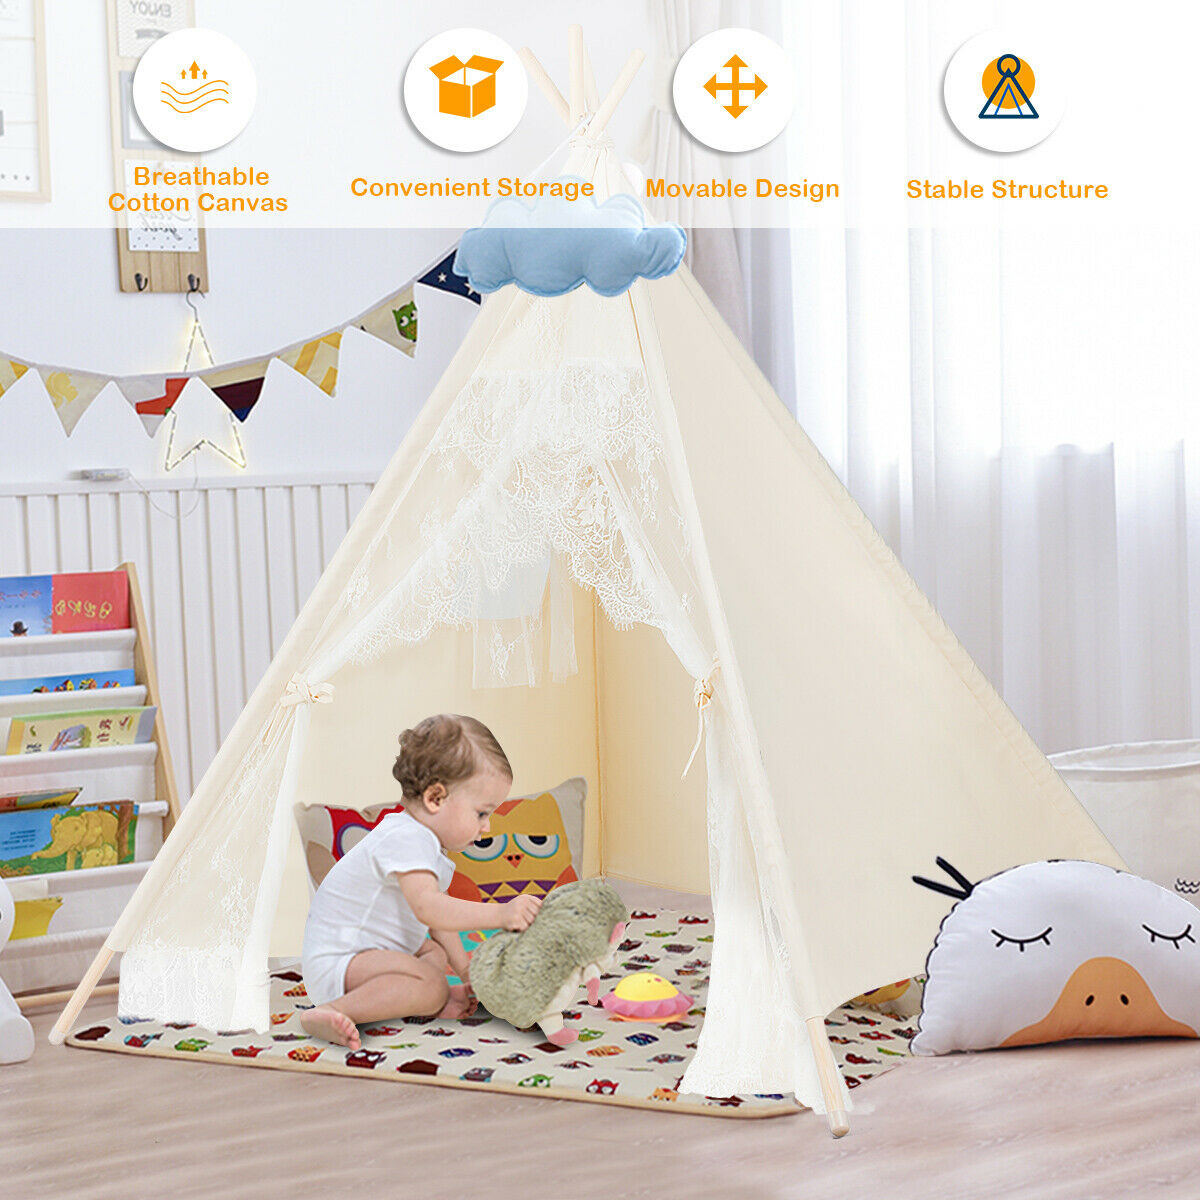 Details about   Kids Lace Teepee Tent Folding Children Playhouse W/ Bag Indoor & Outdoor Play